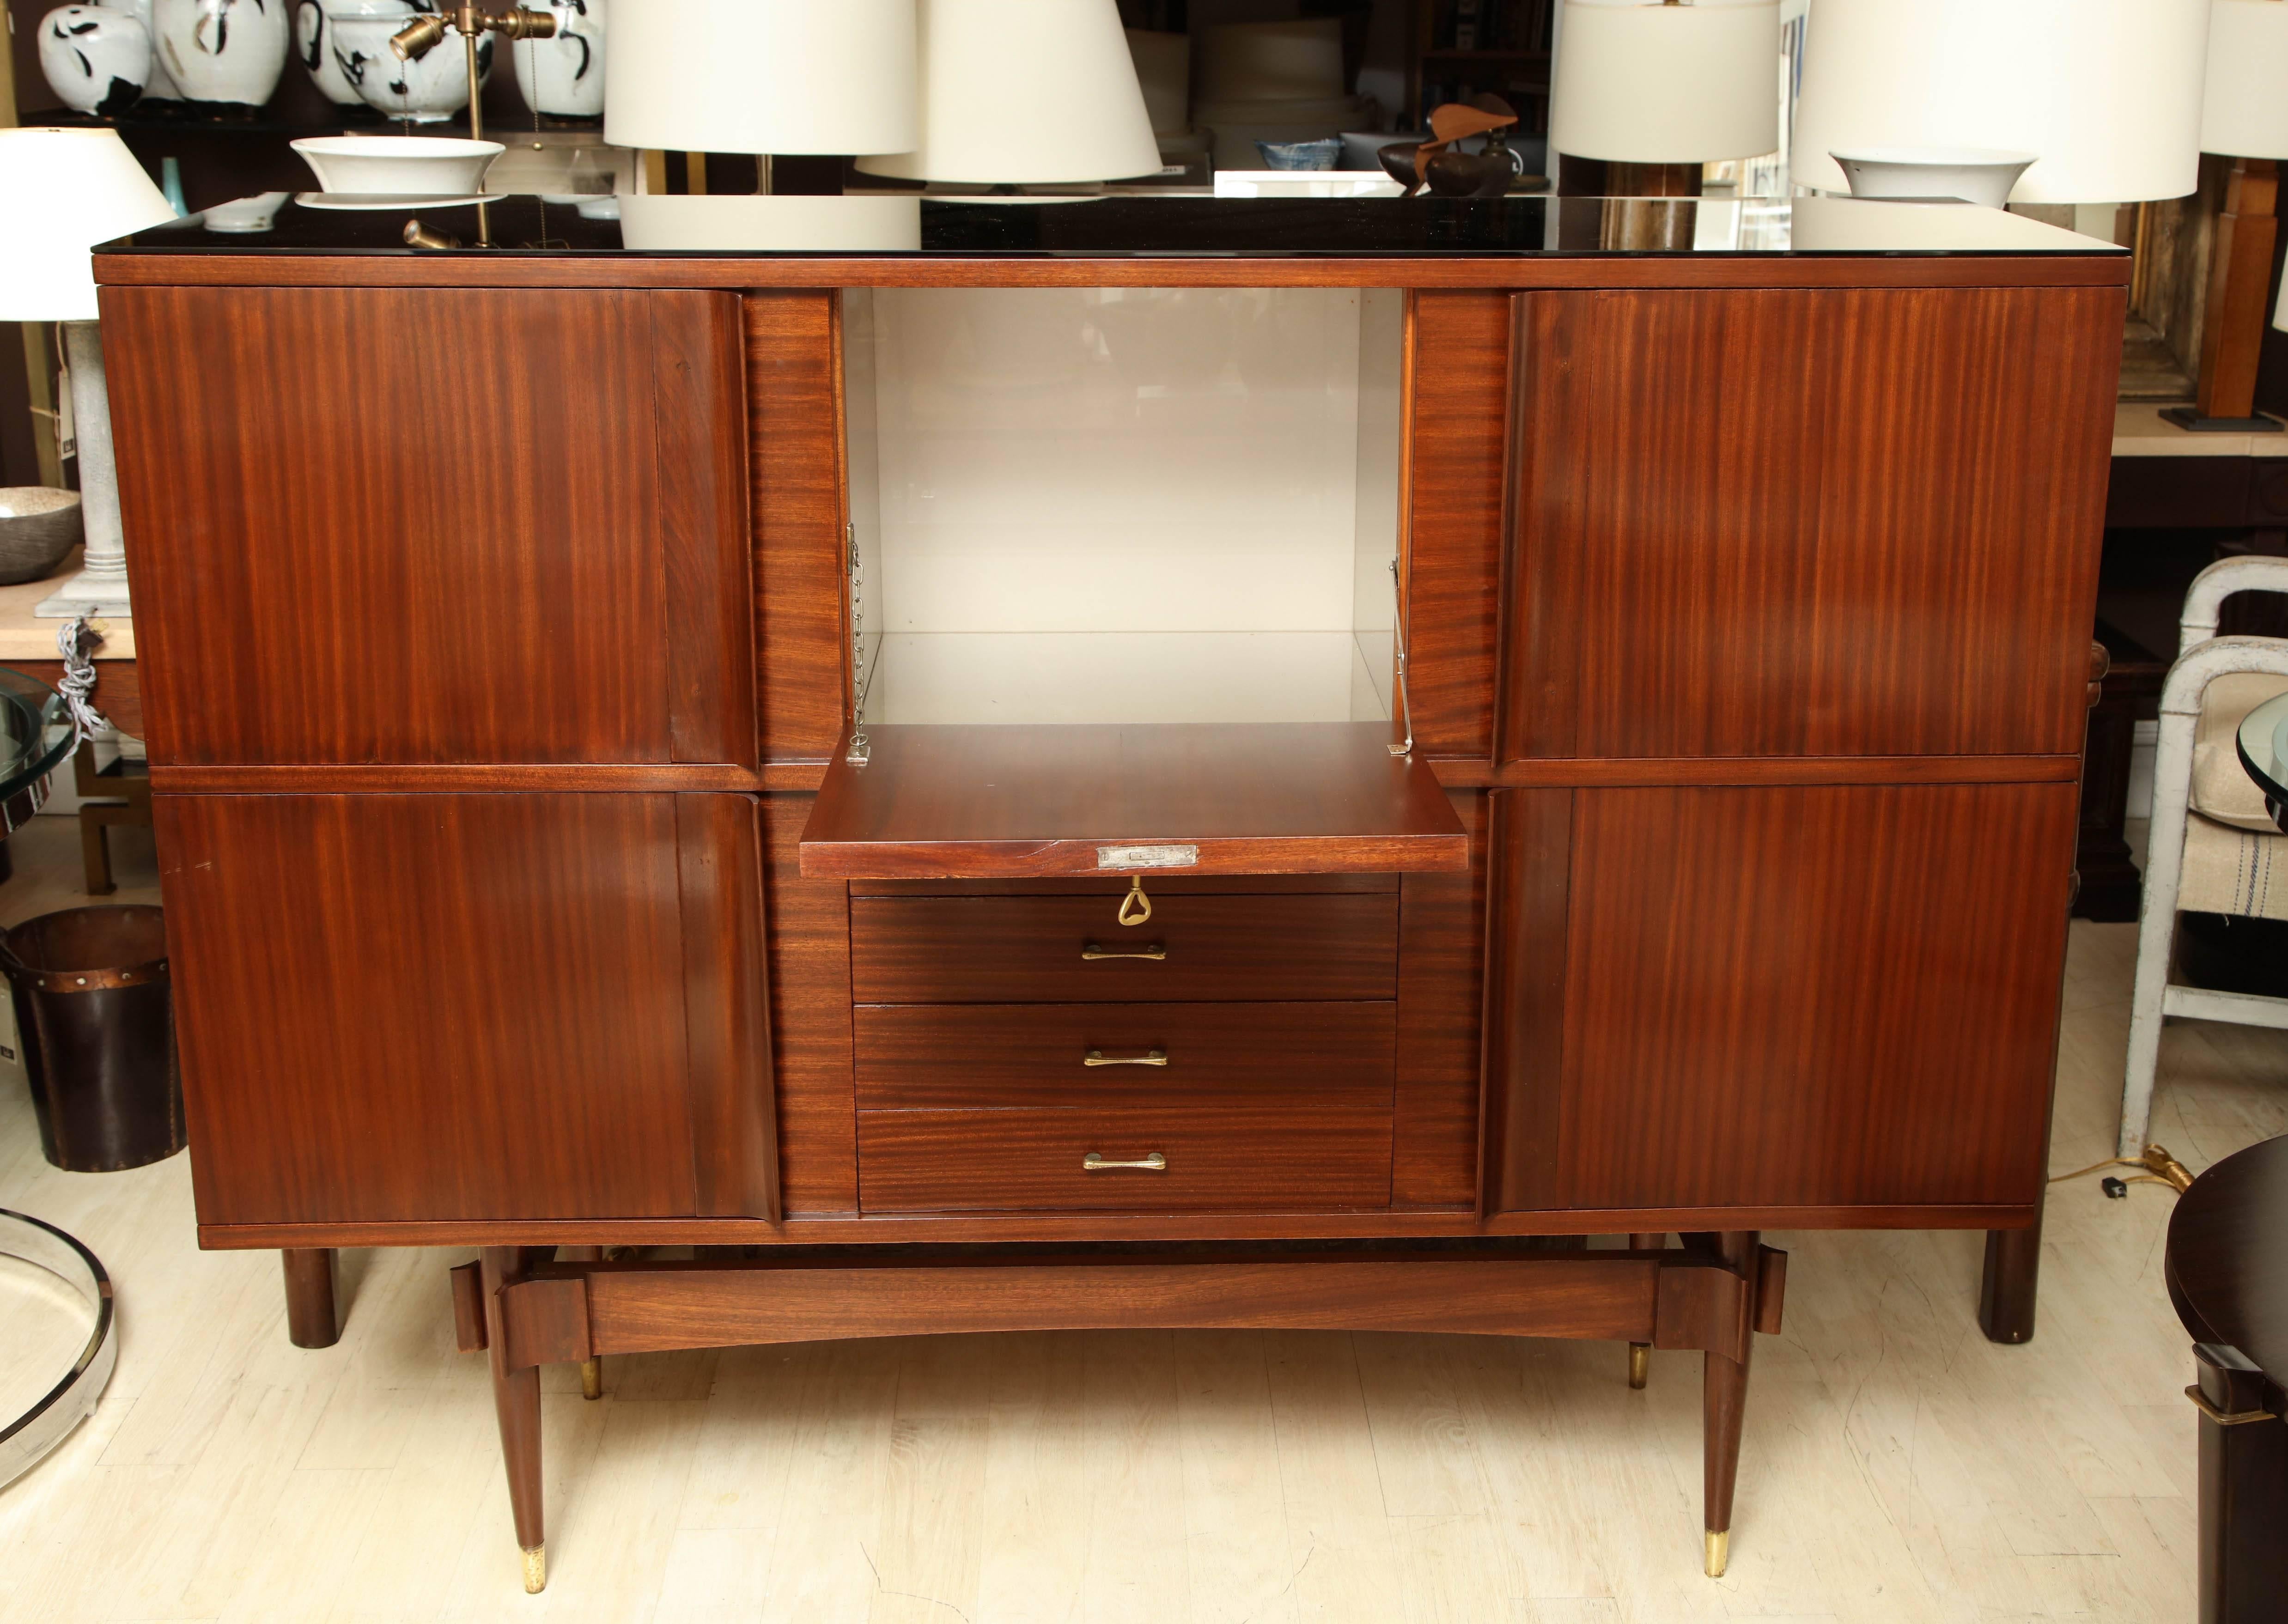 Four-door quarter sawed sapele wood cabinet with three drawers, a drop down bar section, four cabinets, and mirrored glass top. Original brass hardware.

Available to see in our NYC Showroom 
BK Antiques
306 East 61st St. 2nd fl.
New York, NY 10065